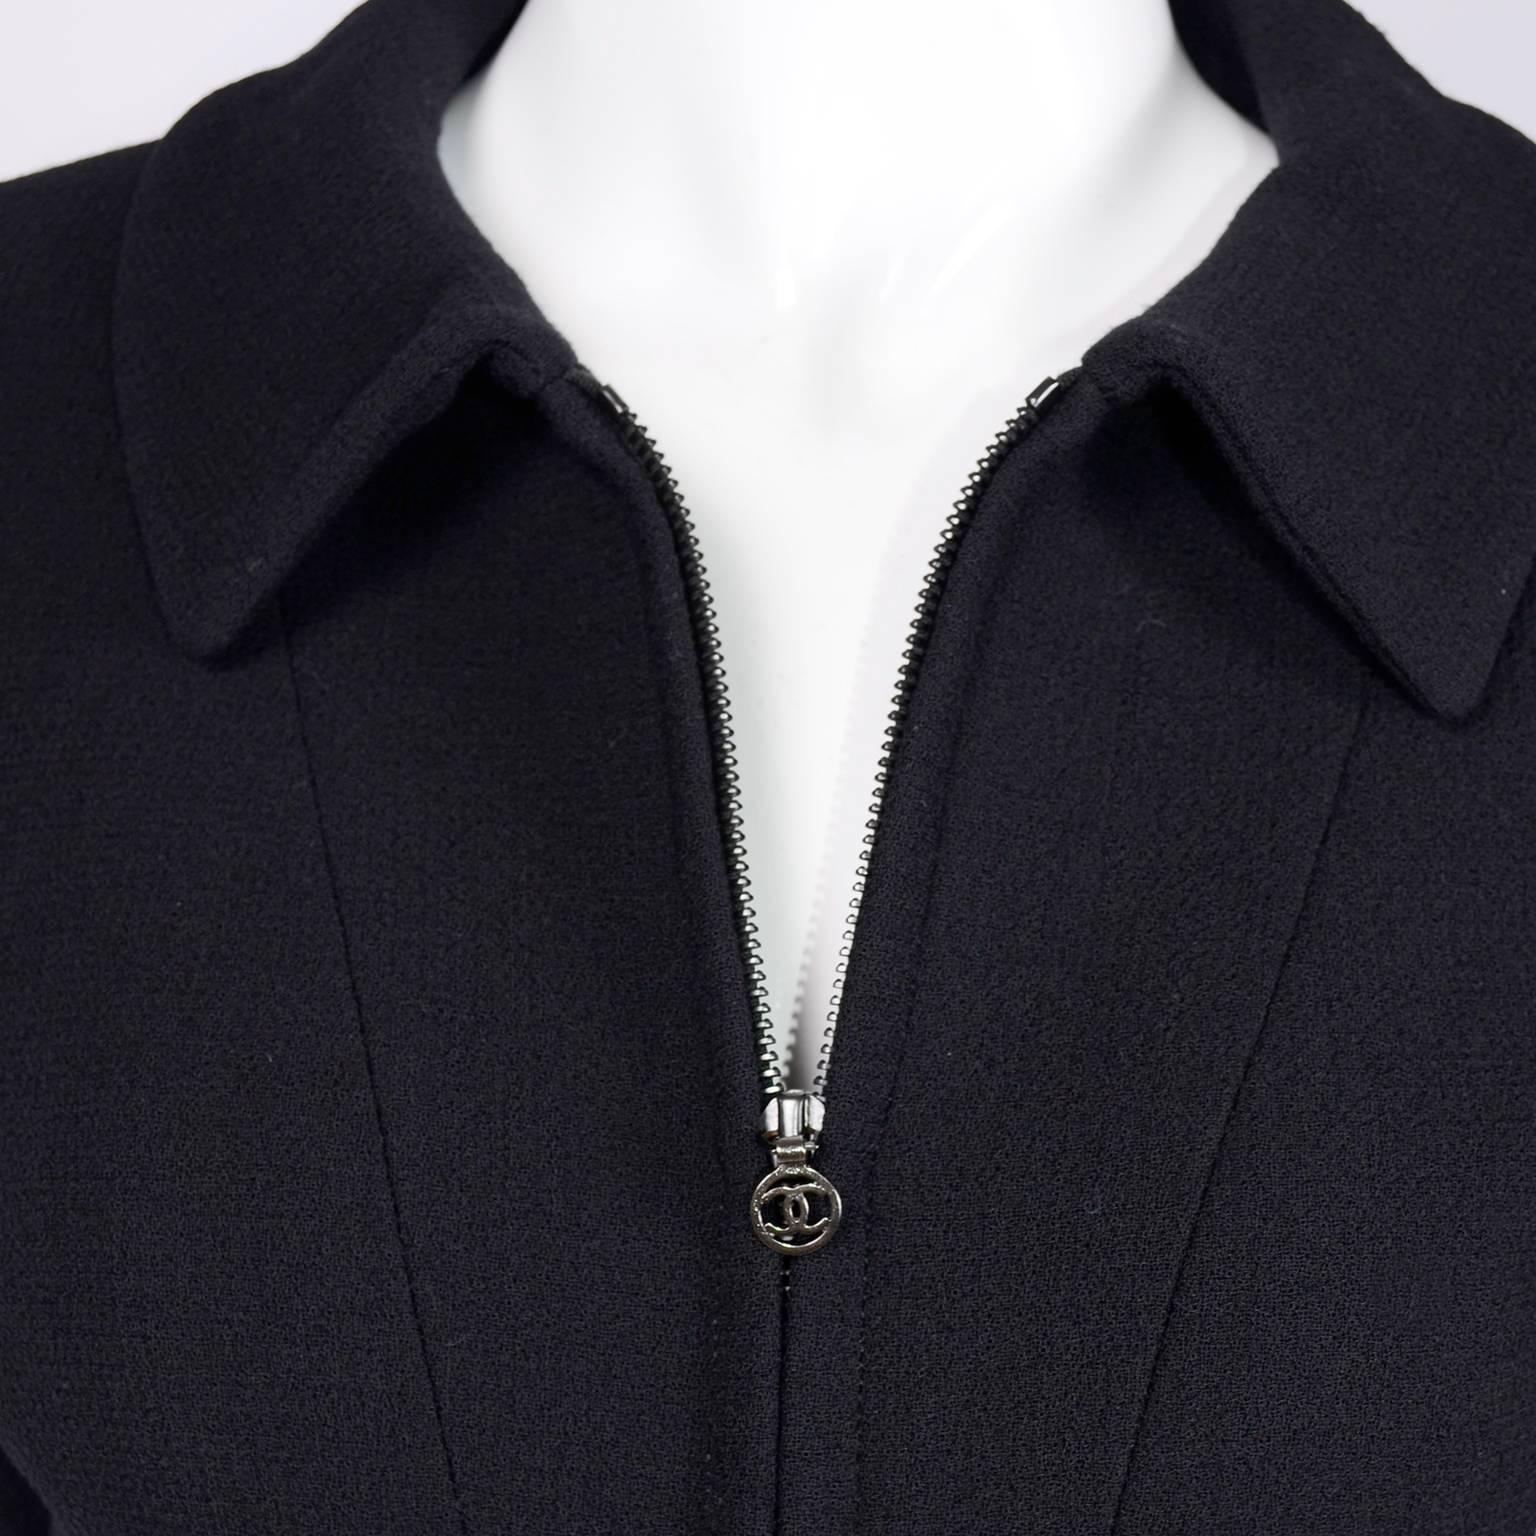 This Chanel jacket has a zipper that runs 3/4 the way down the jacket and has visible decorative seam lines on the front. We tried to lighten one of the photos to show the details! Lined in silk CC logo lining, this blazer is from Chanel’s 1997